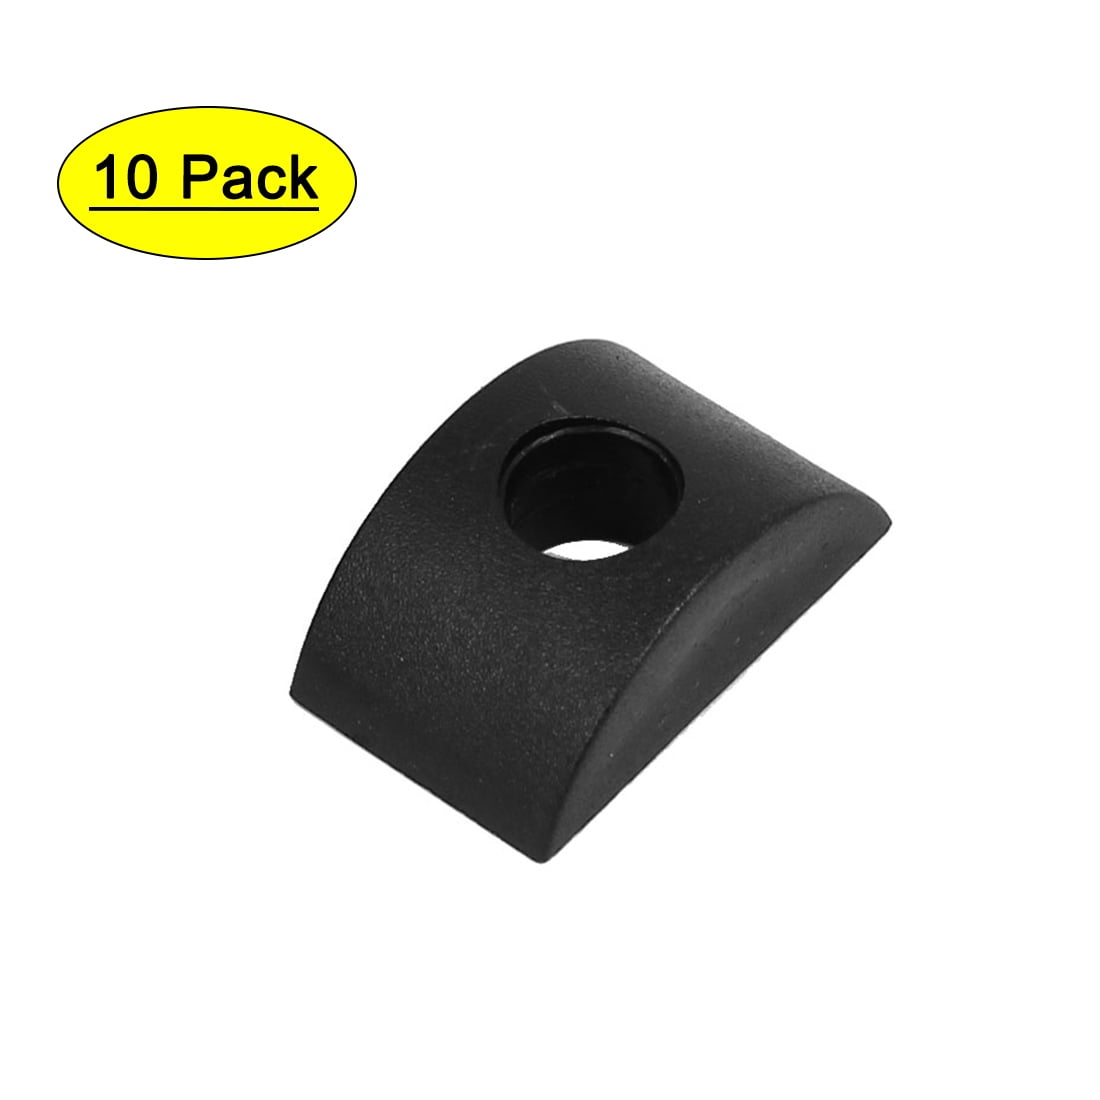 10mm Hole Dia Furniture Connector Half Moon Nuts Spacer Washer Black 10PCS 